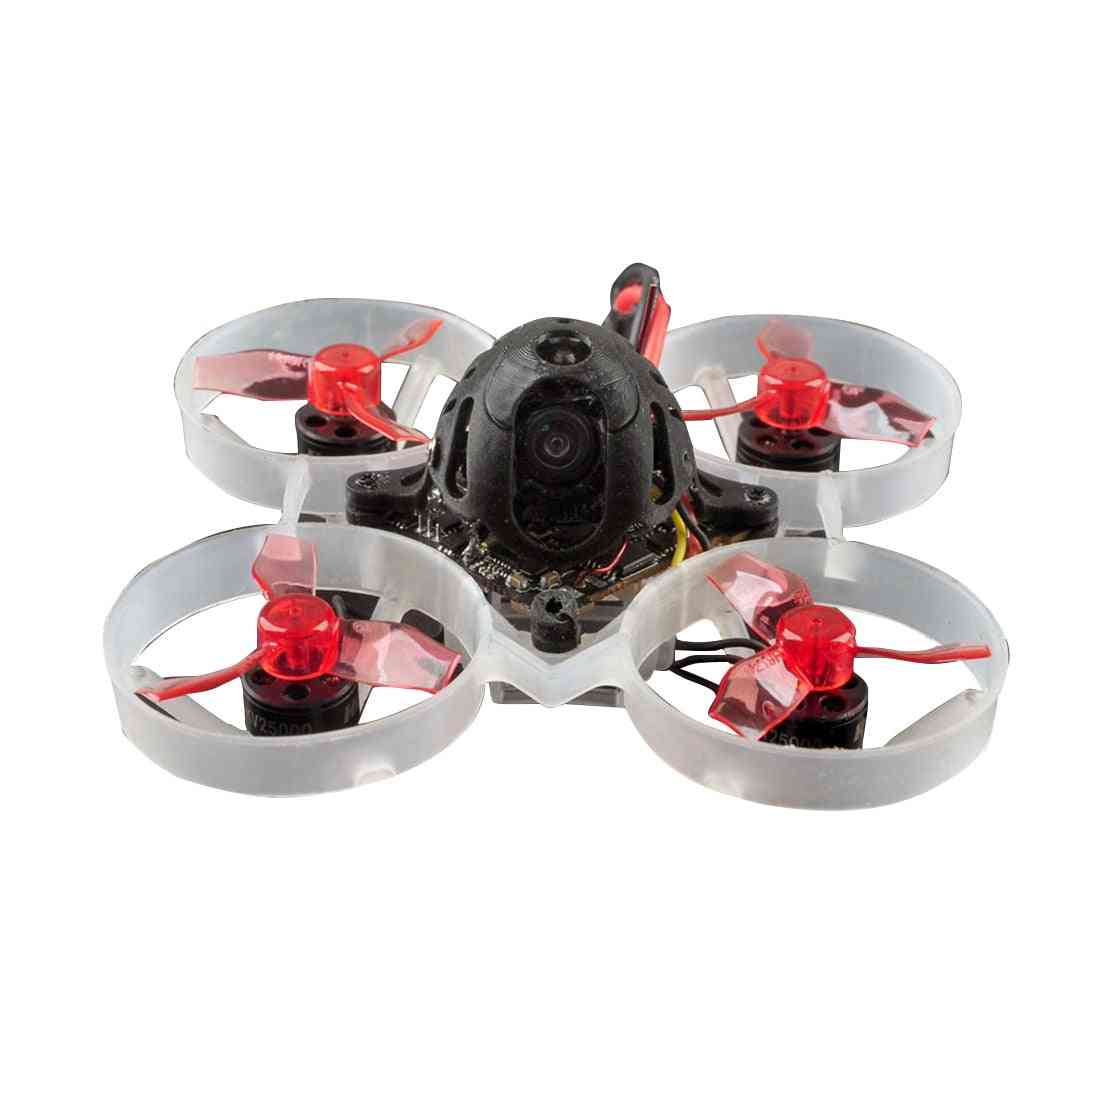 Racing Drone With 4 In 1 - Easy To Use